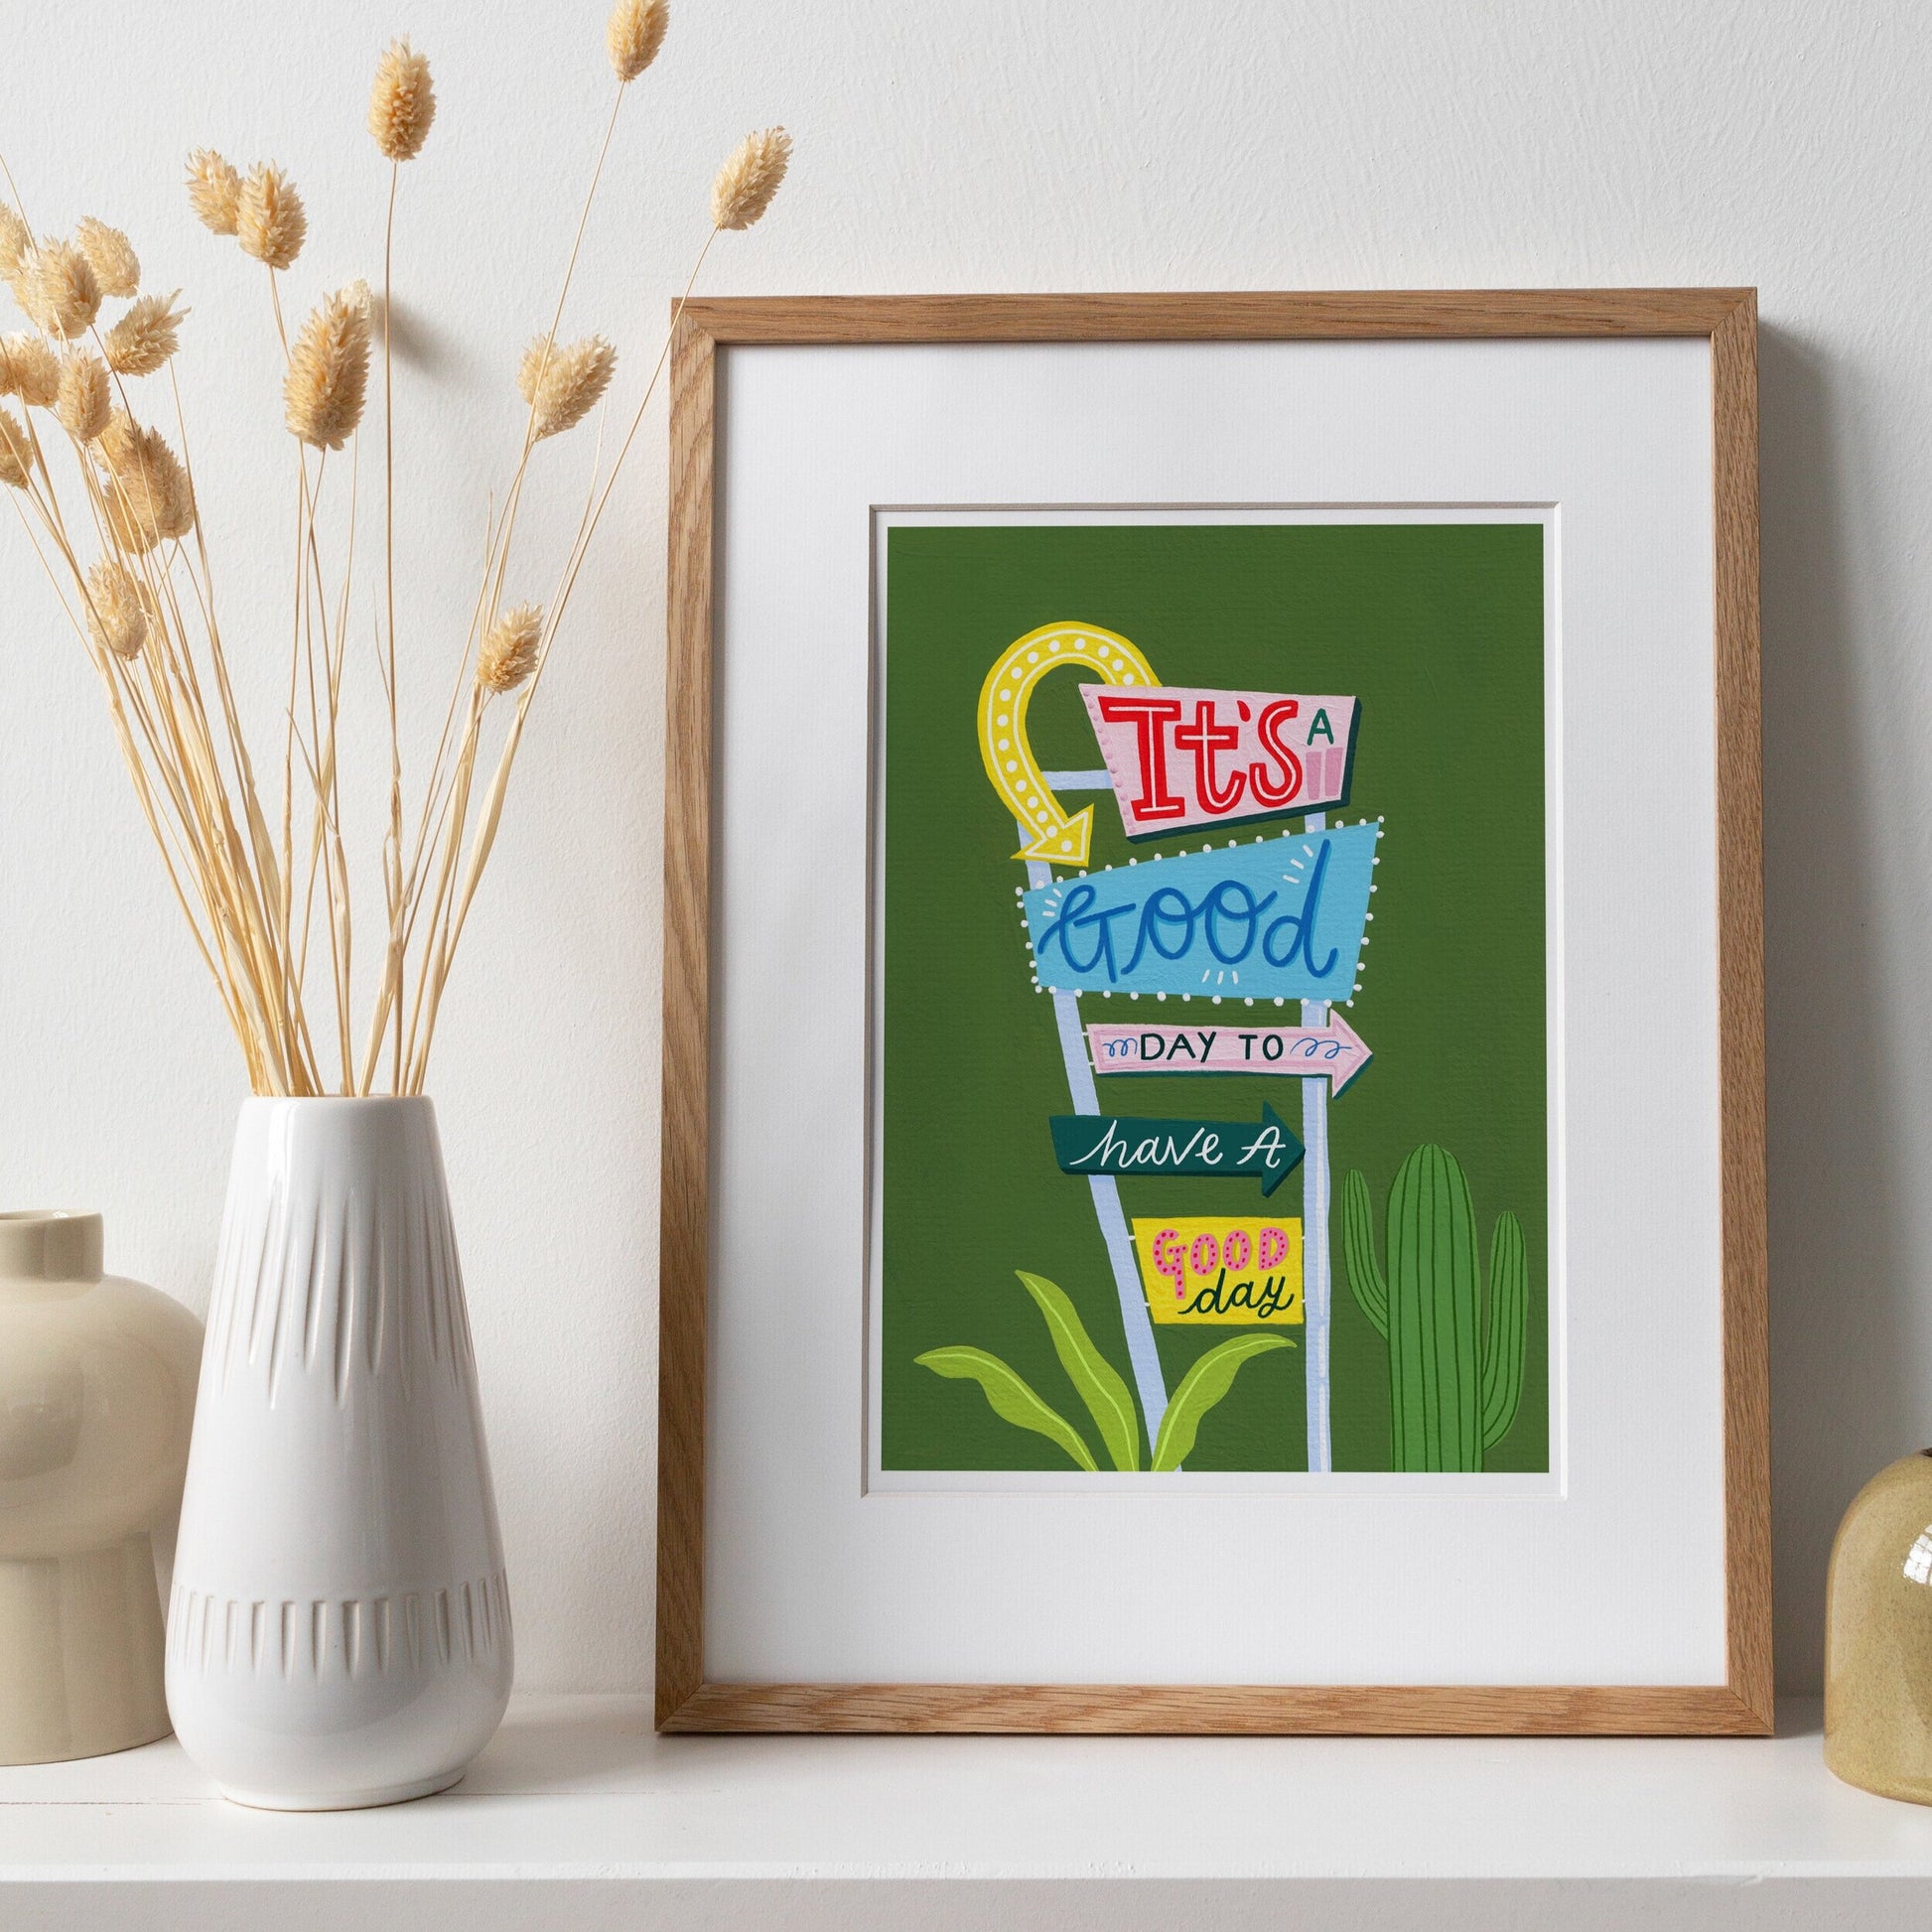 print of a retro motel sign, with green background and cacti, writing within the signs says 'it's a good day to have a good day'